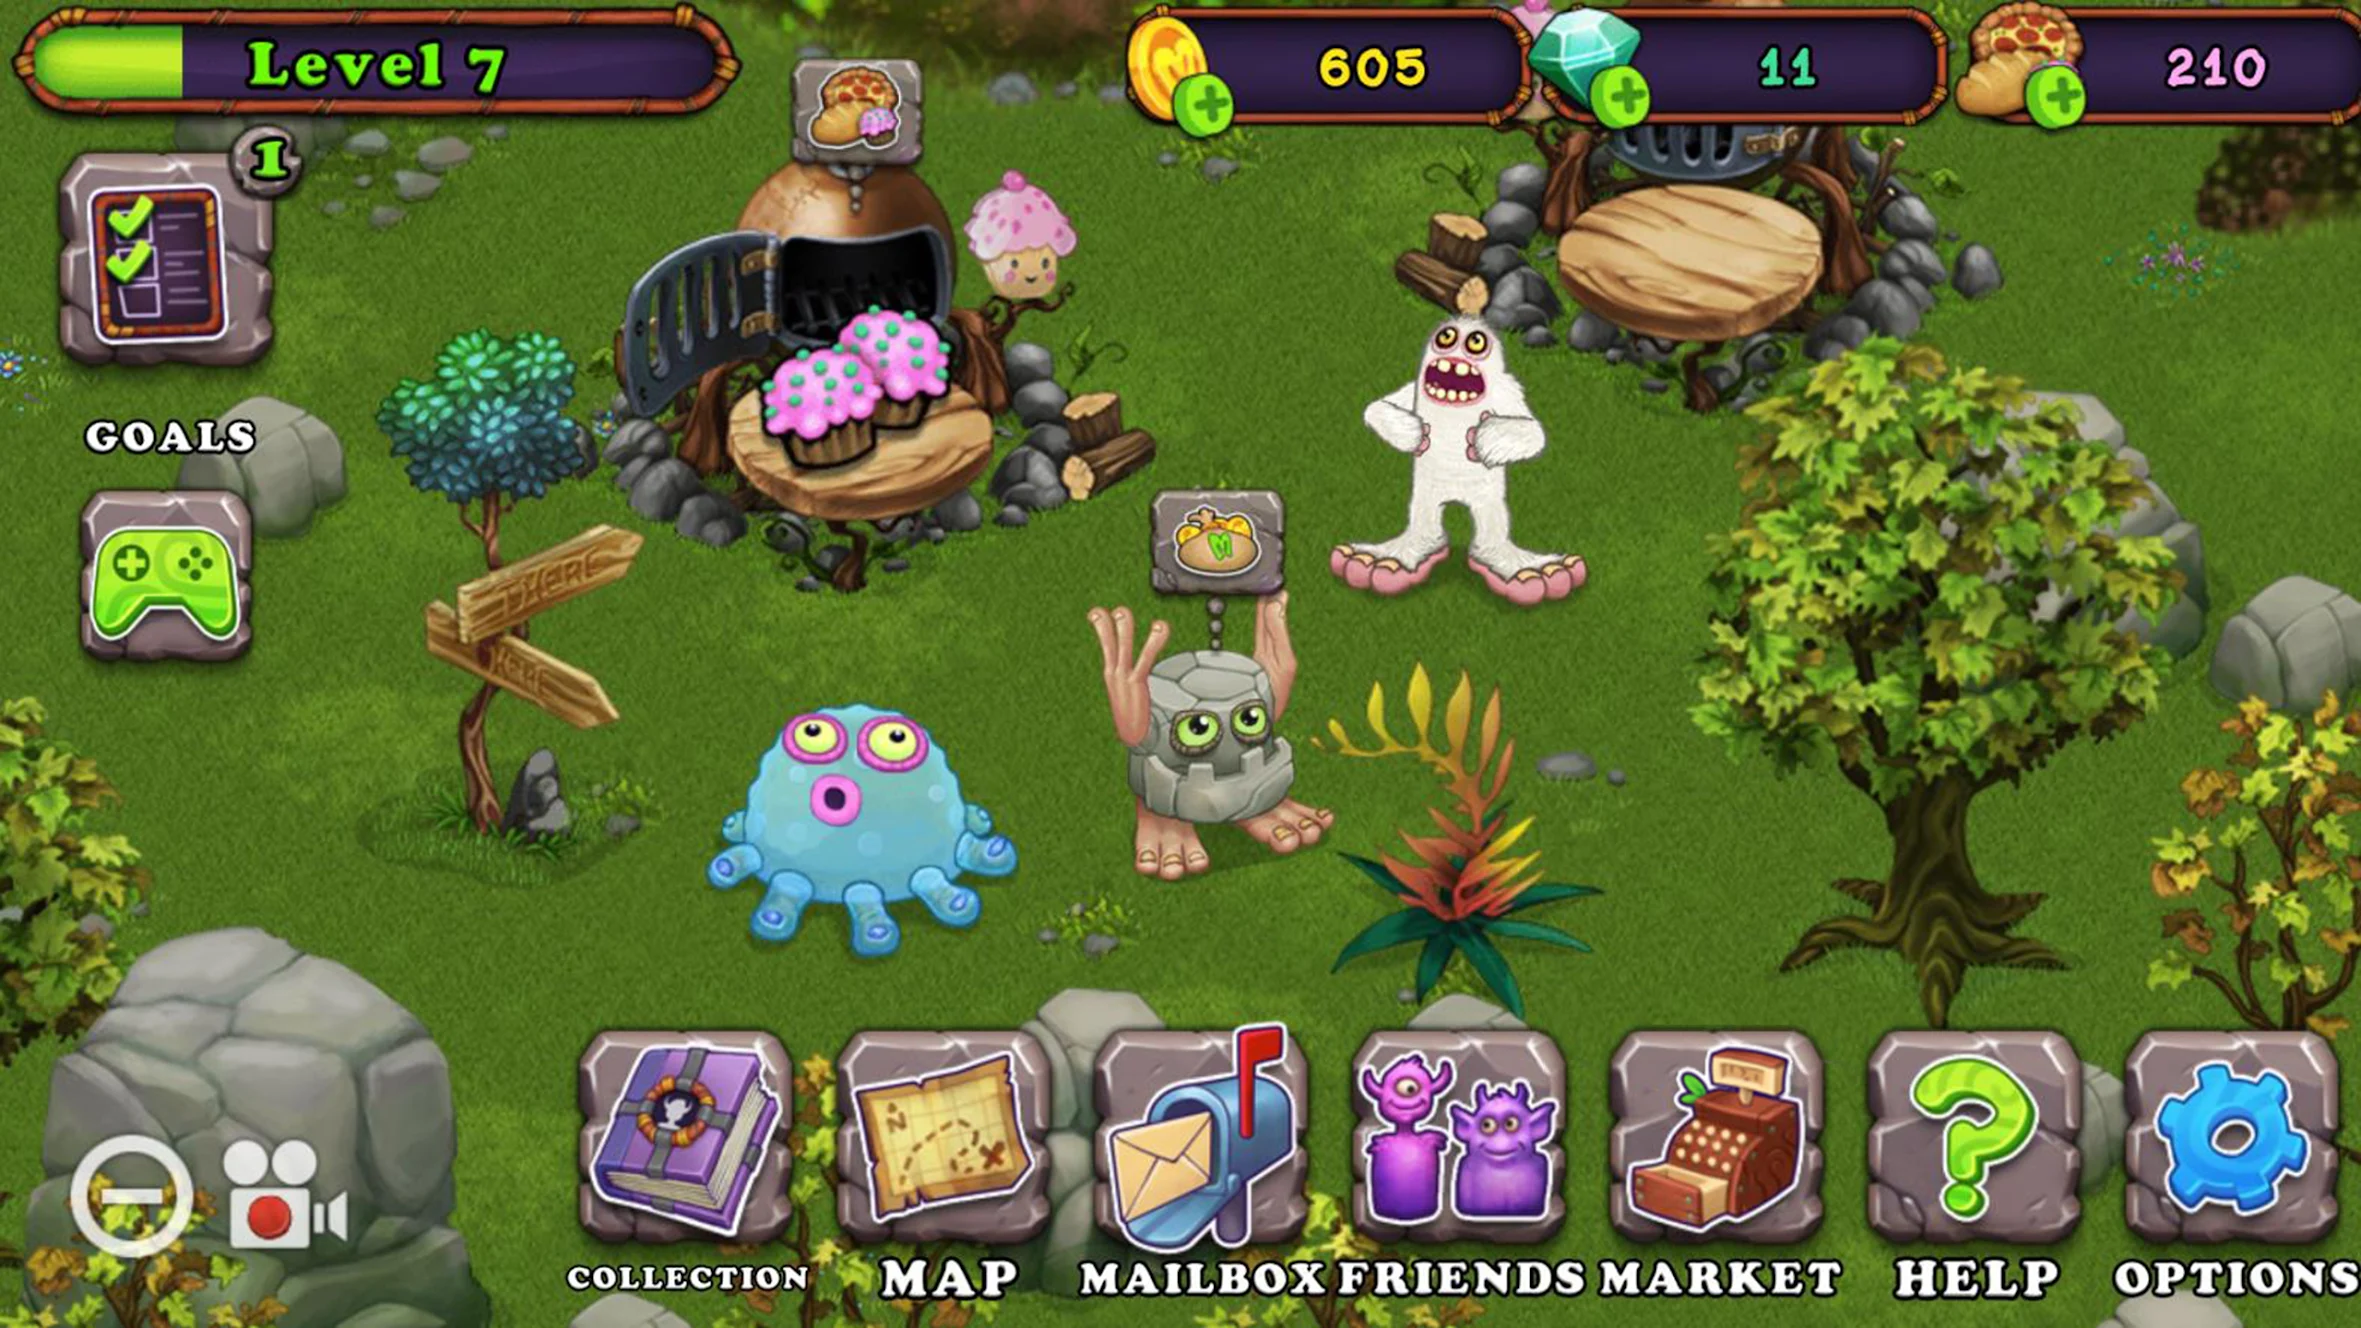 About the Gameplay of My Singing Monsters Mod Apk